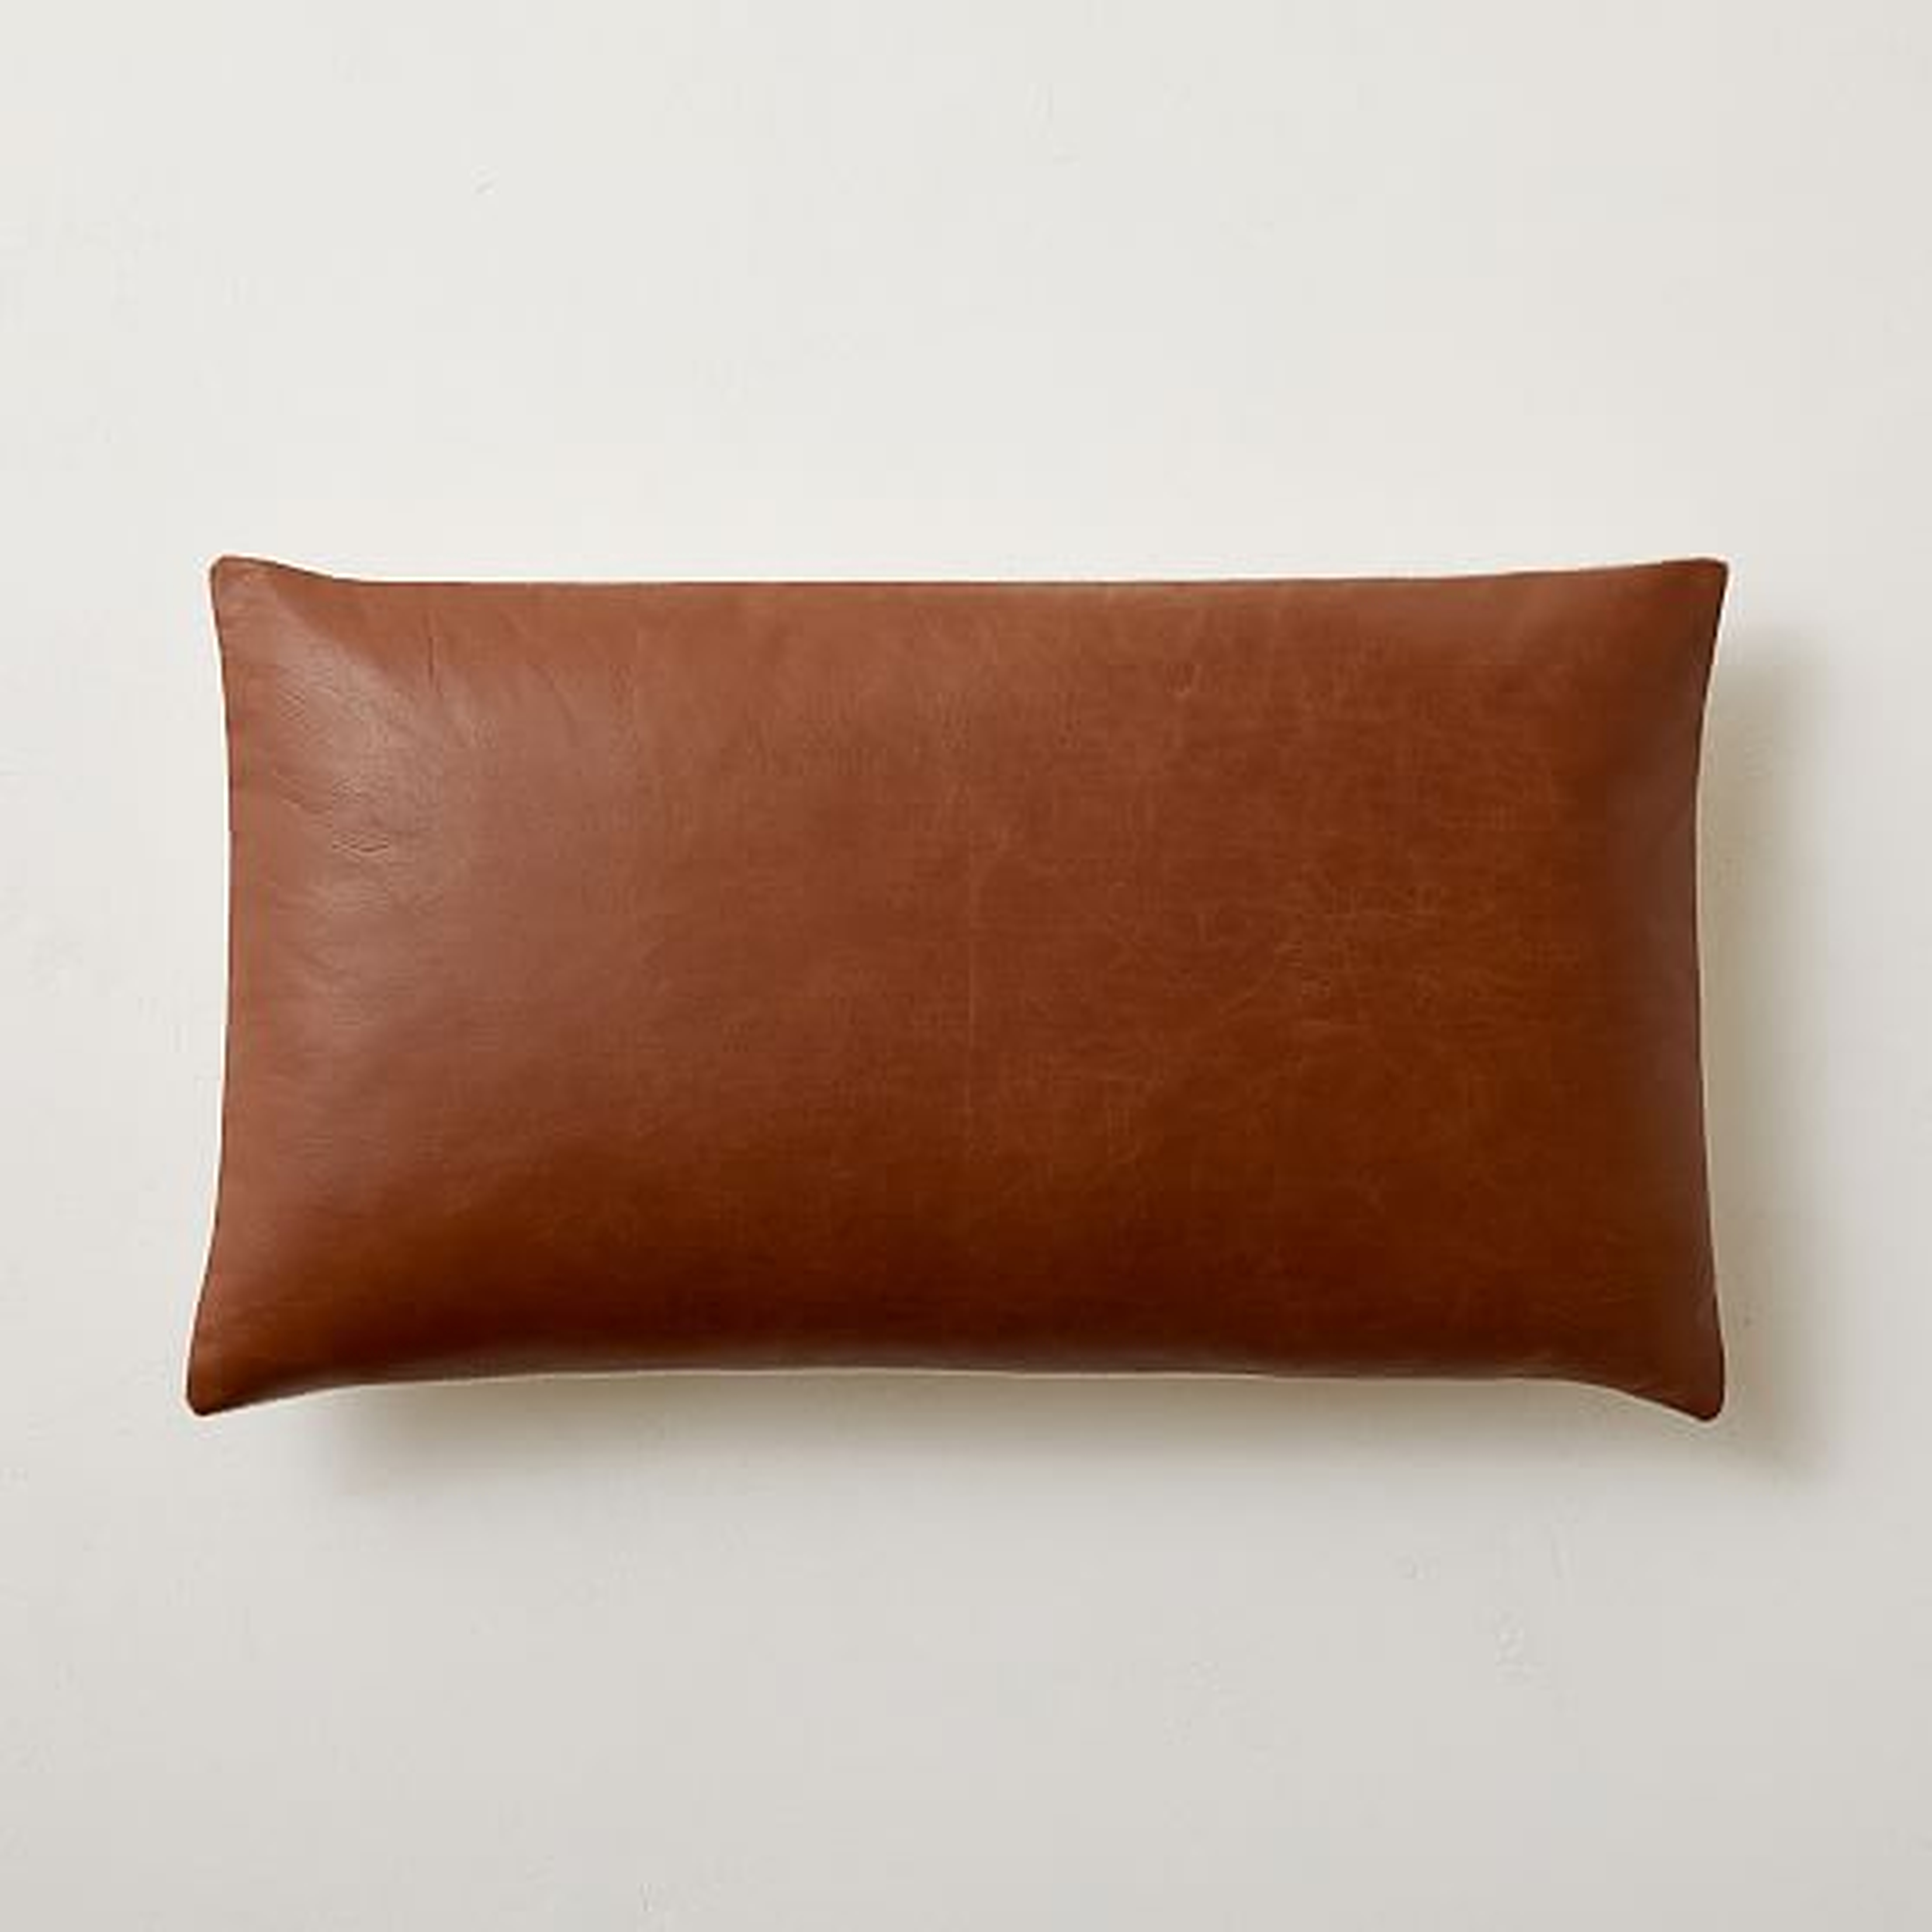 Leather Pillow Cover, 12"x21", Nut, Set of 2 - West Elm